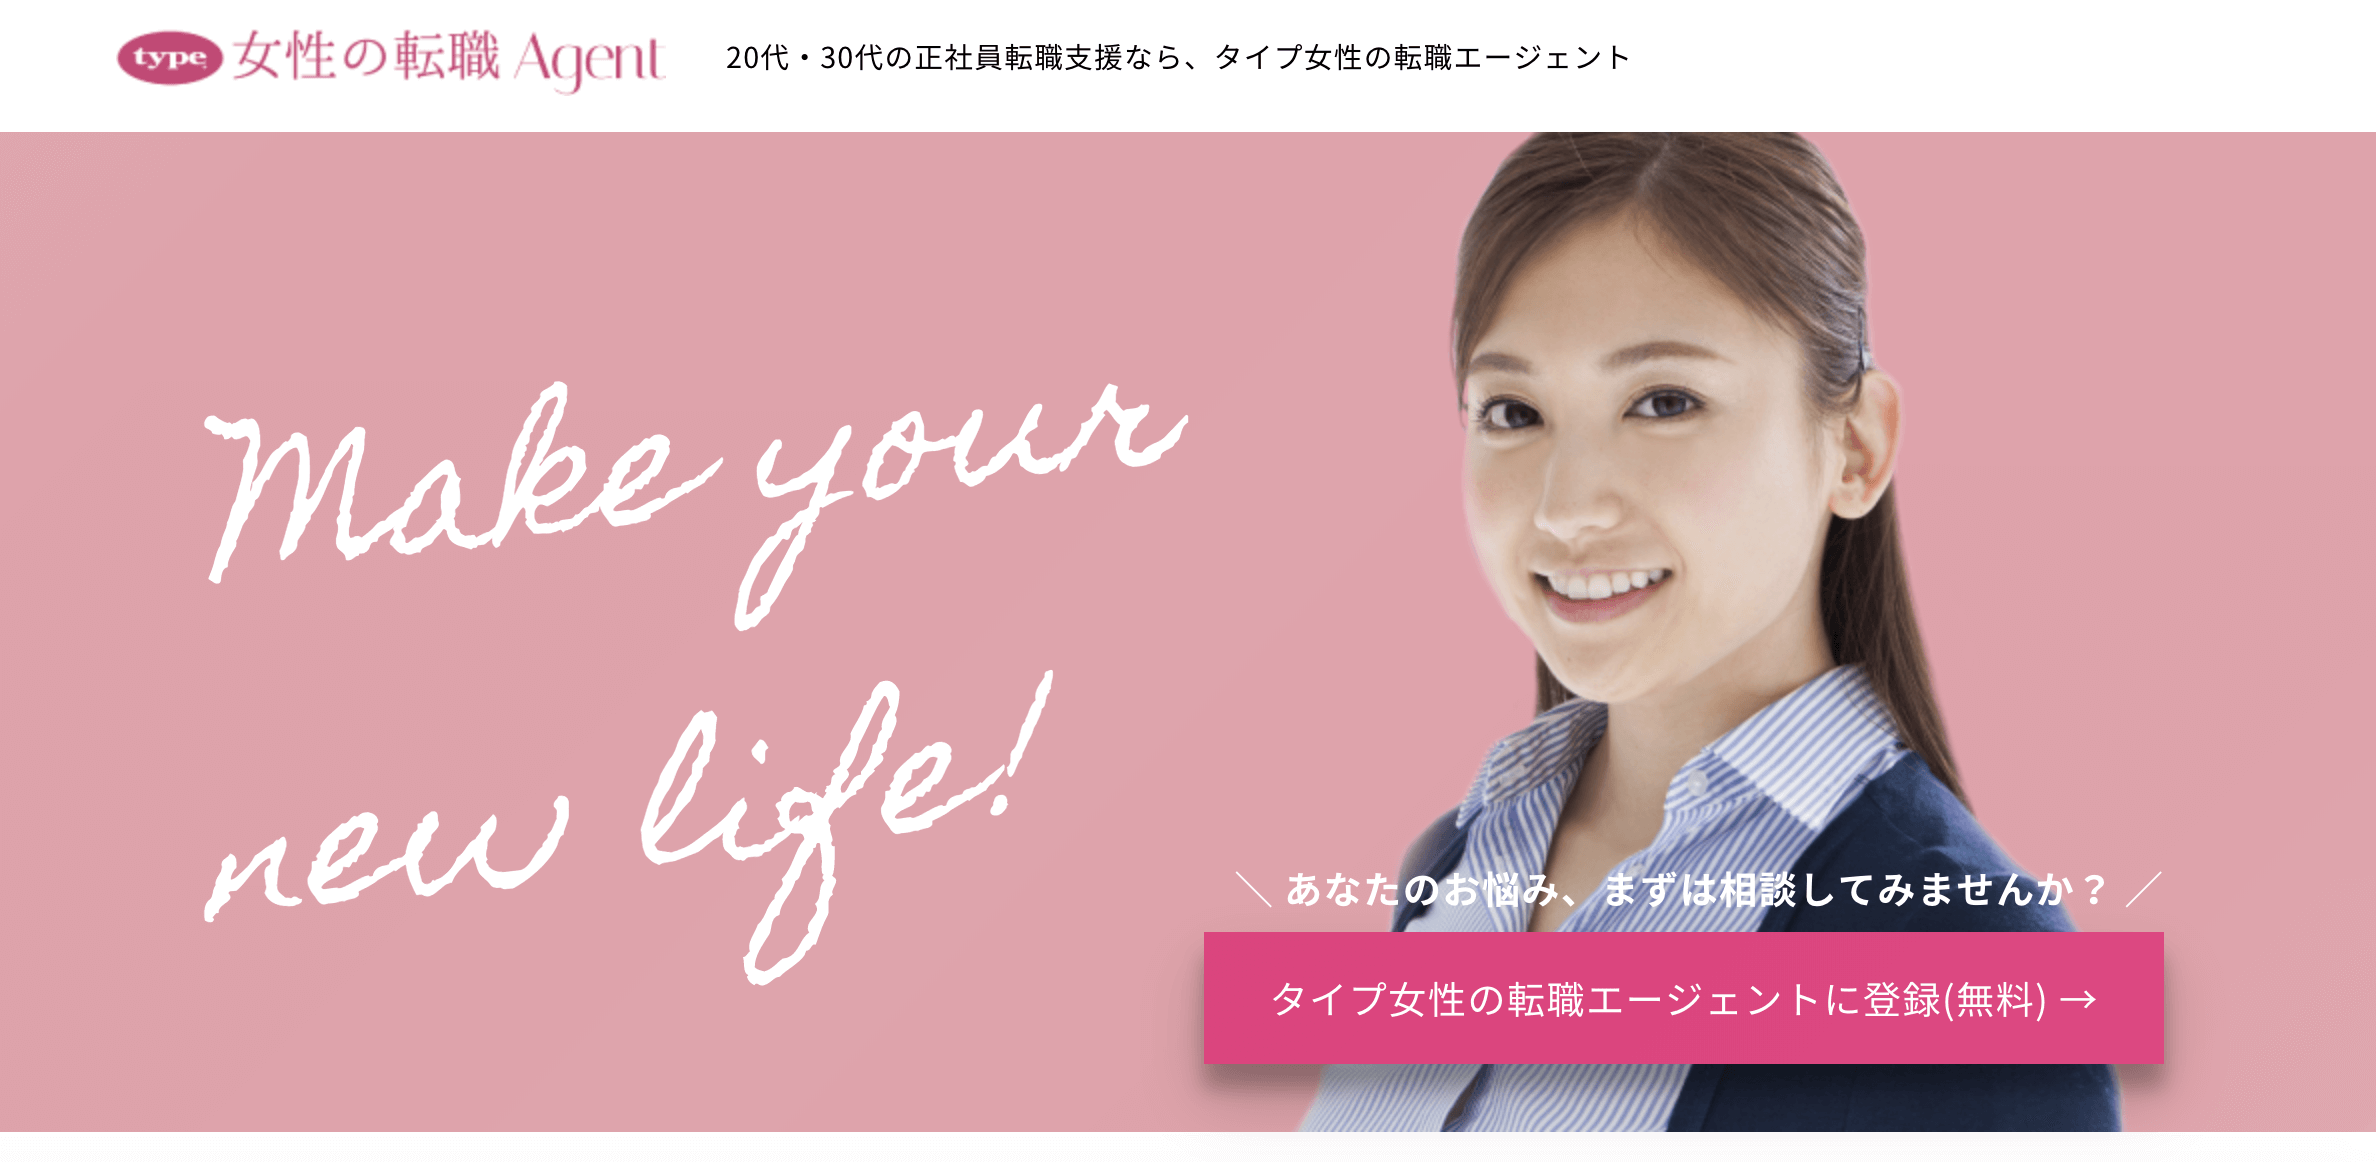 type女性の転職エージェント